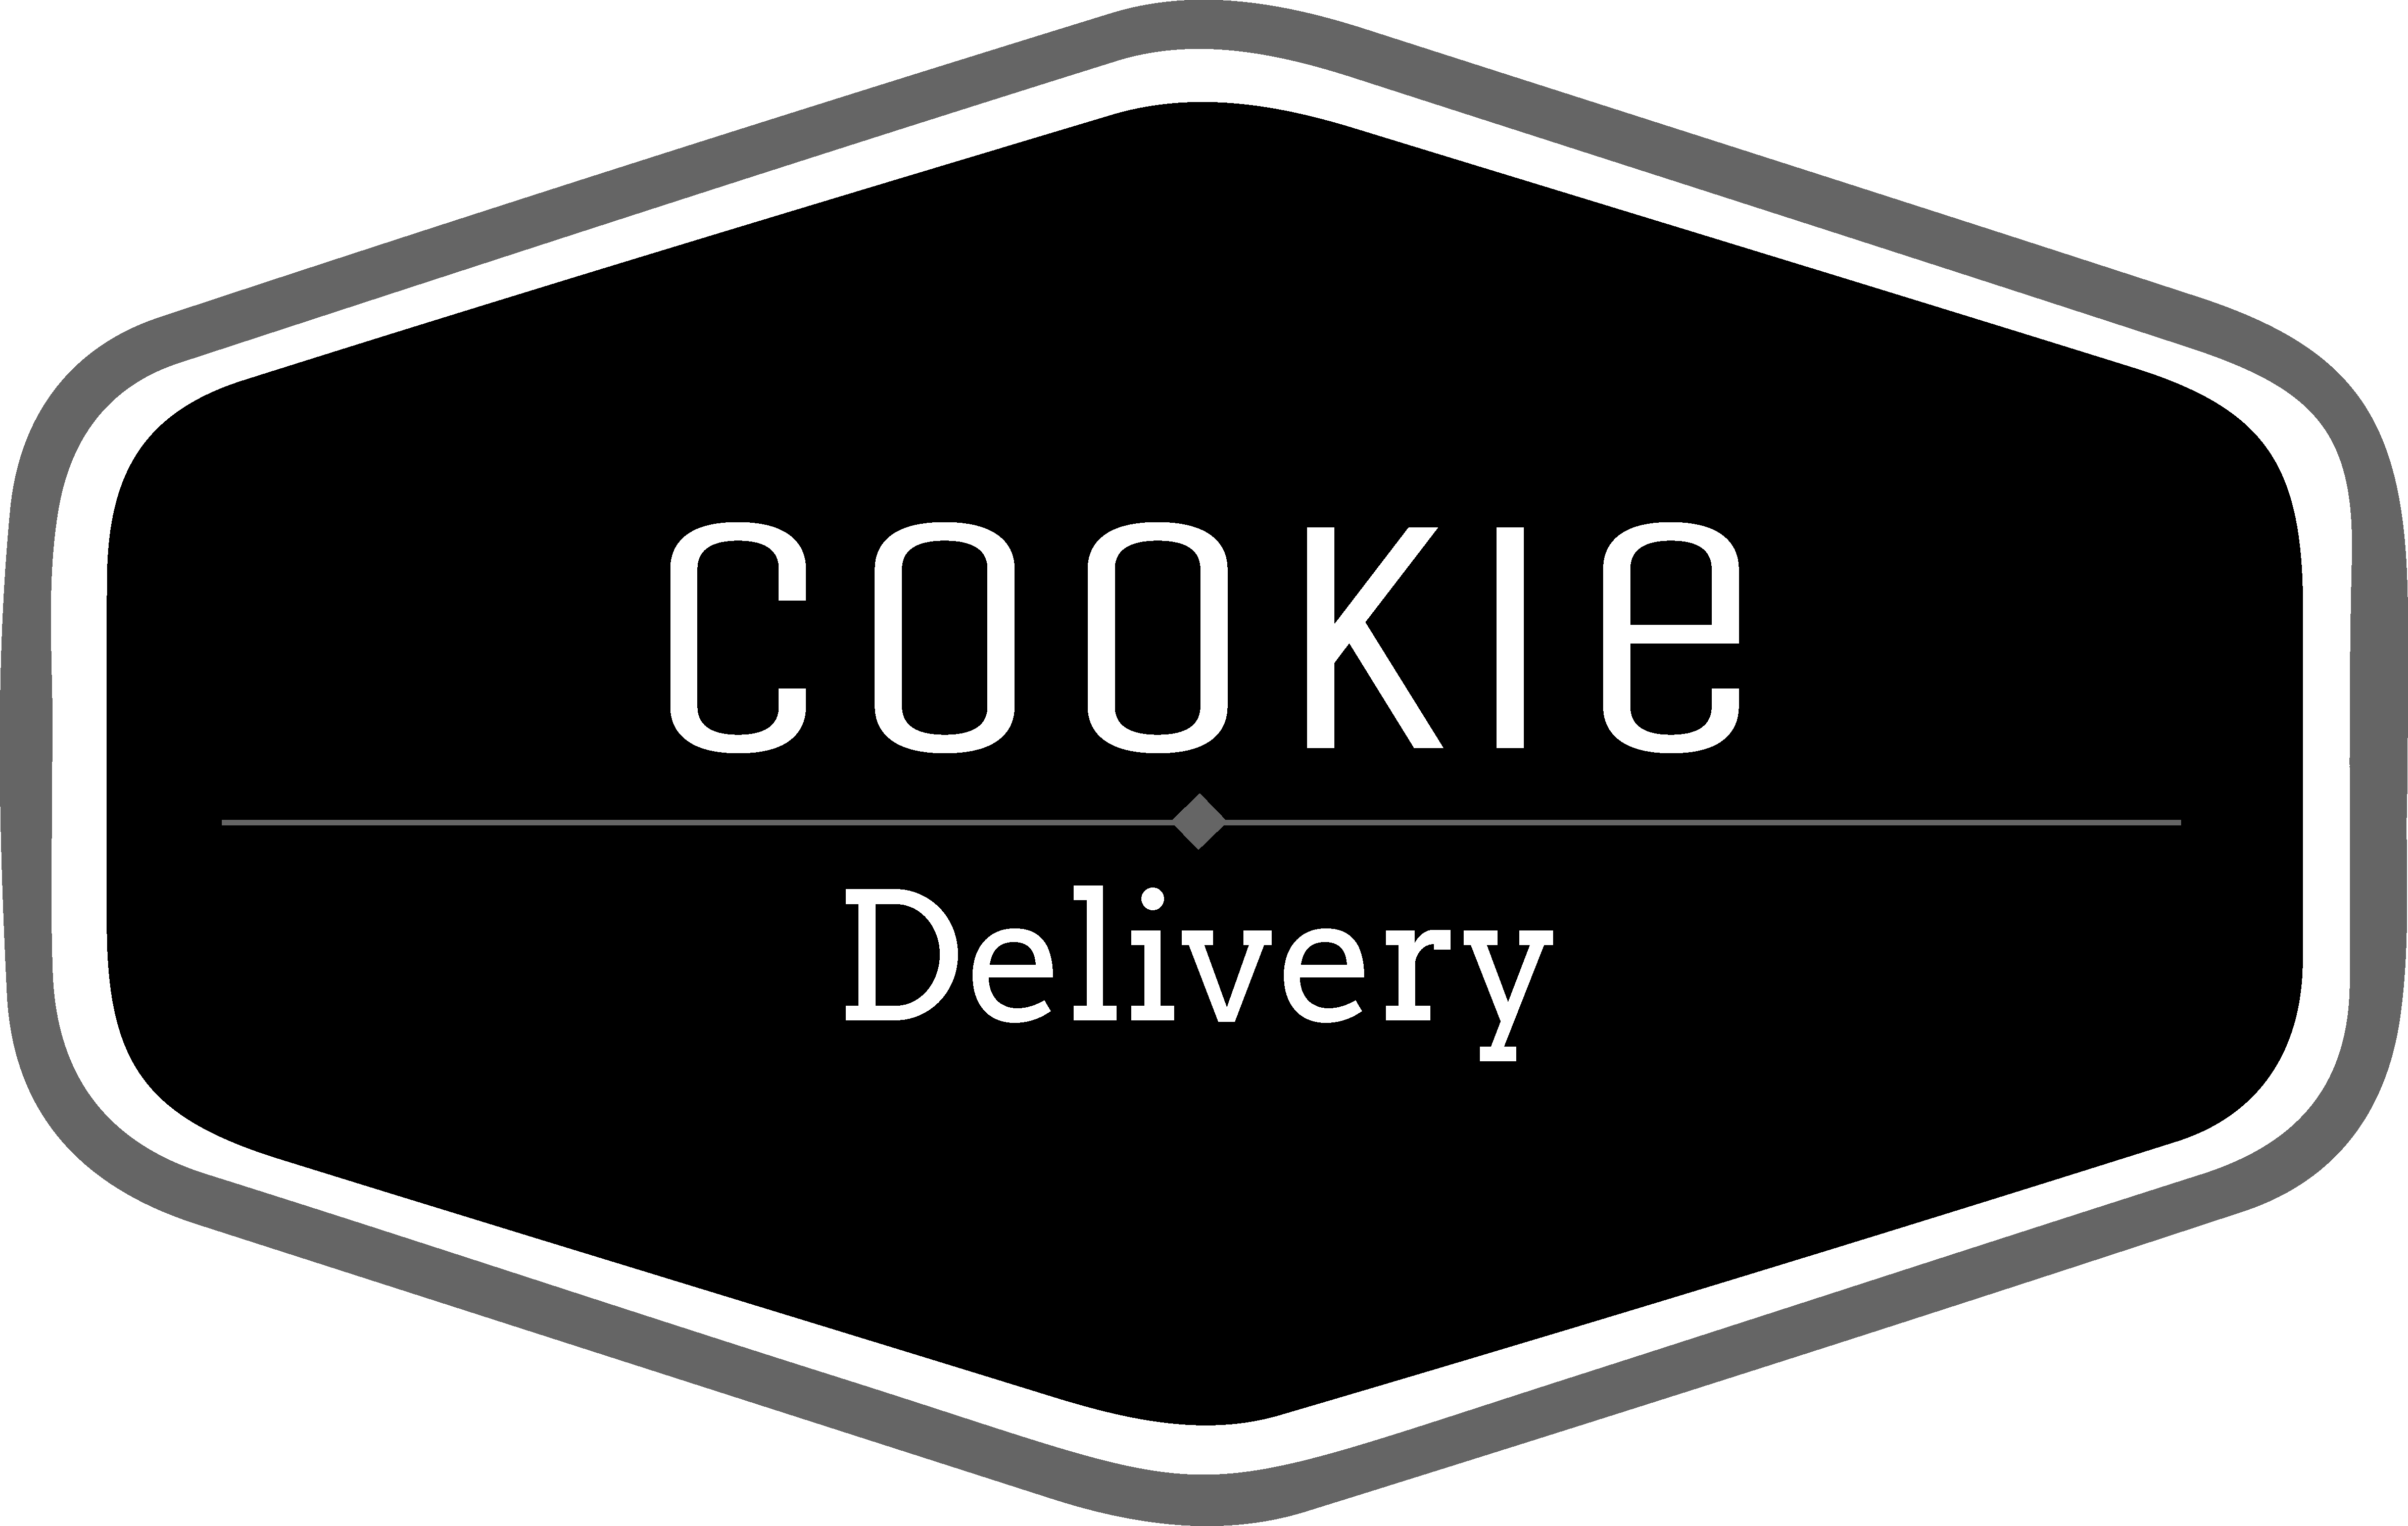 COOKIE DELIVERY